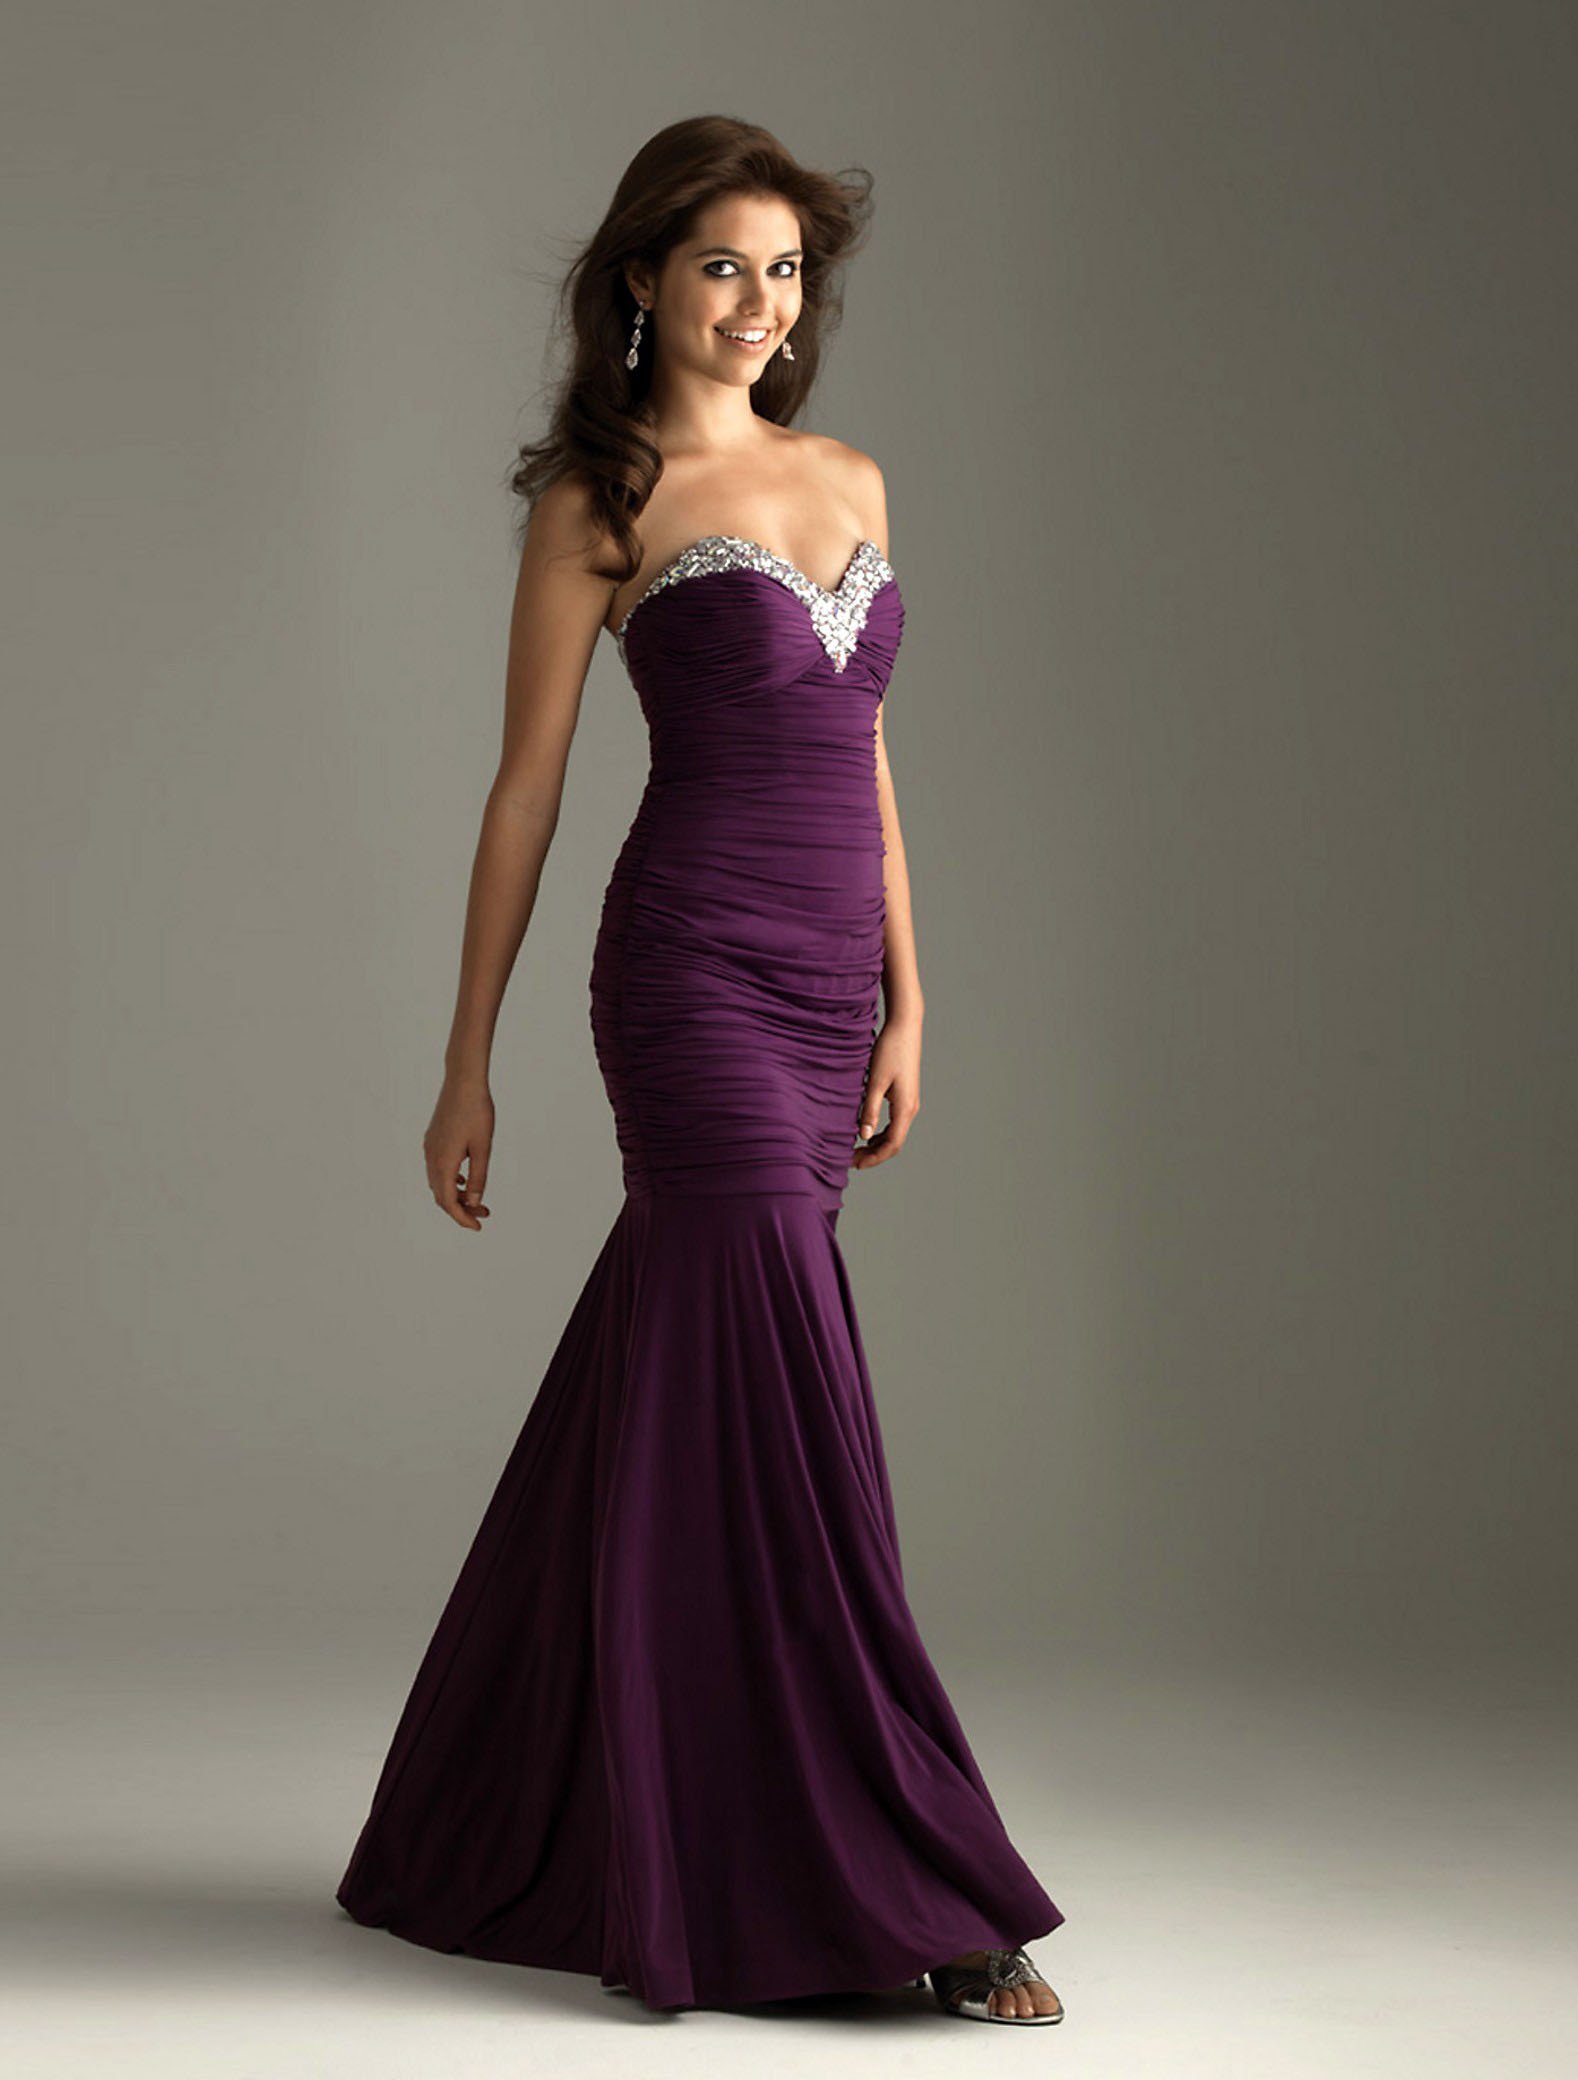 ADD GLAMOUR TO THE OCCASSION BY BEAUTIFUL EVENING DRESSES